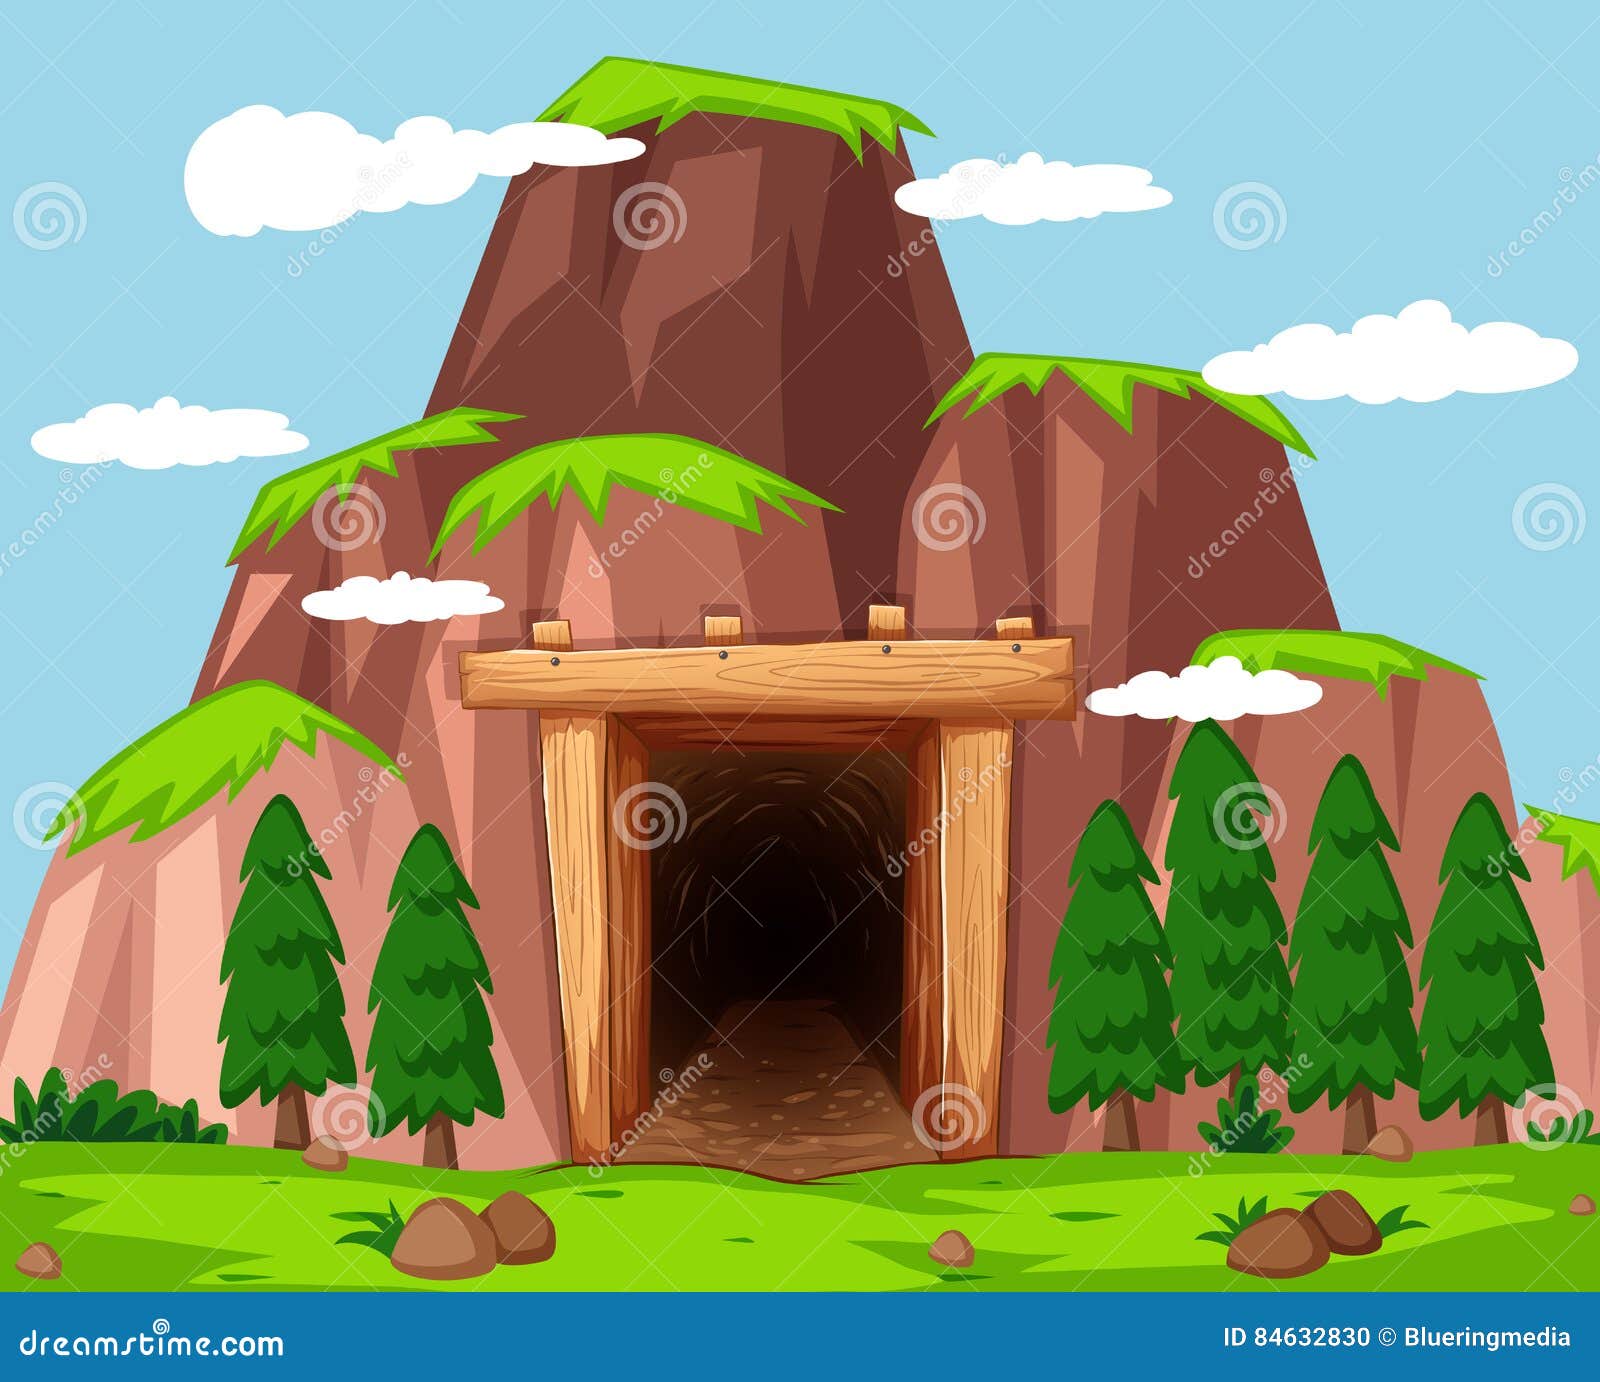 Mine Entrance at the Mountain Stock Vector - Illustration of scene ...